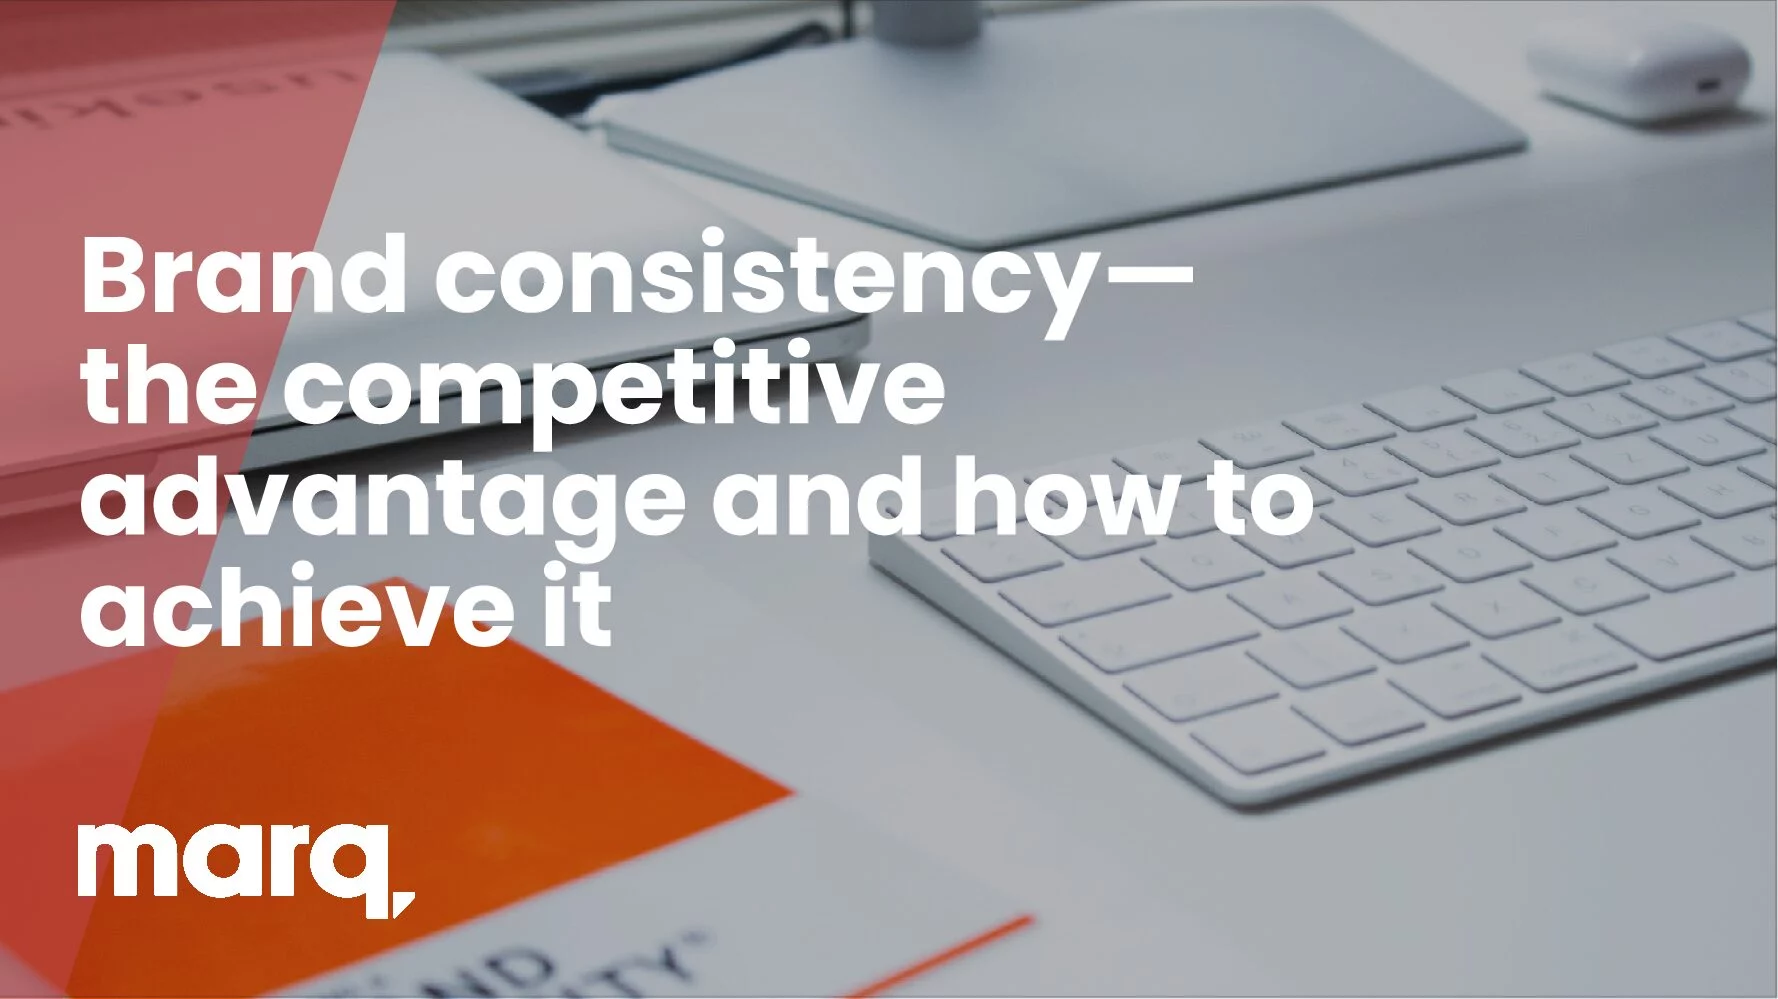 Brand consistency—the competitive advantage and how to achieve it